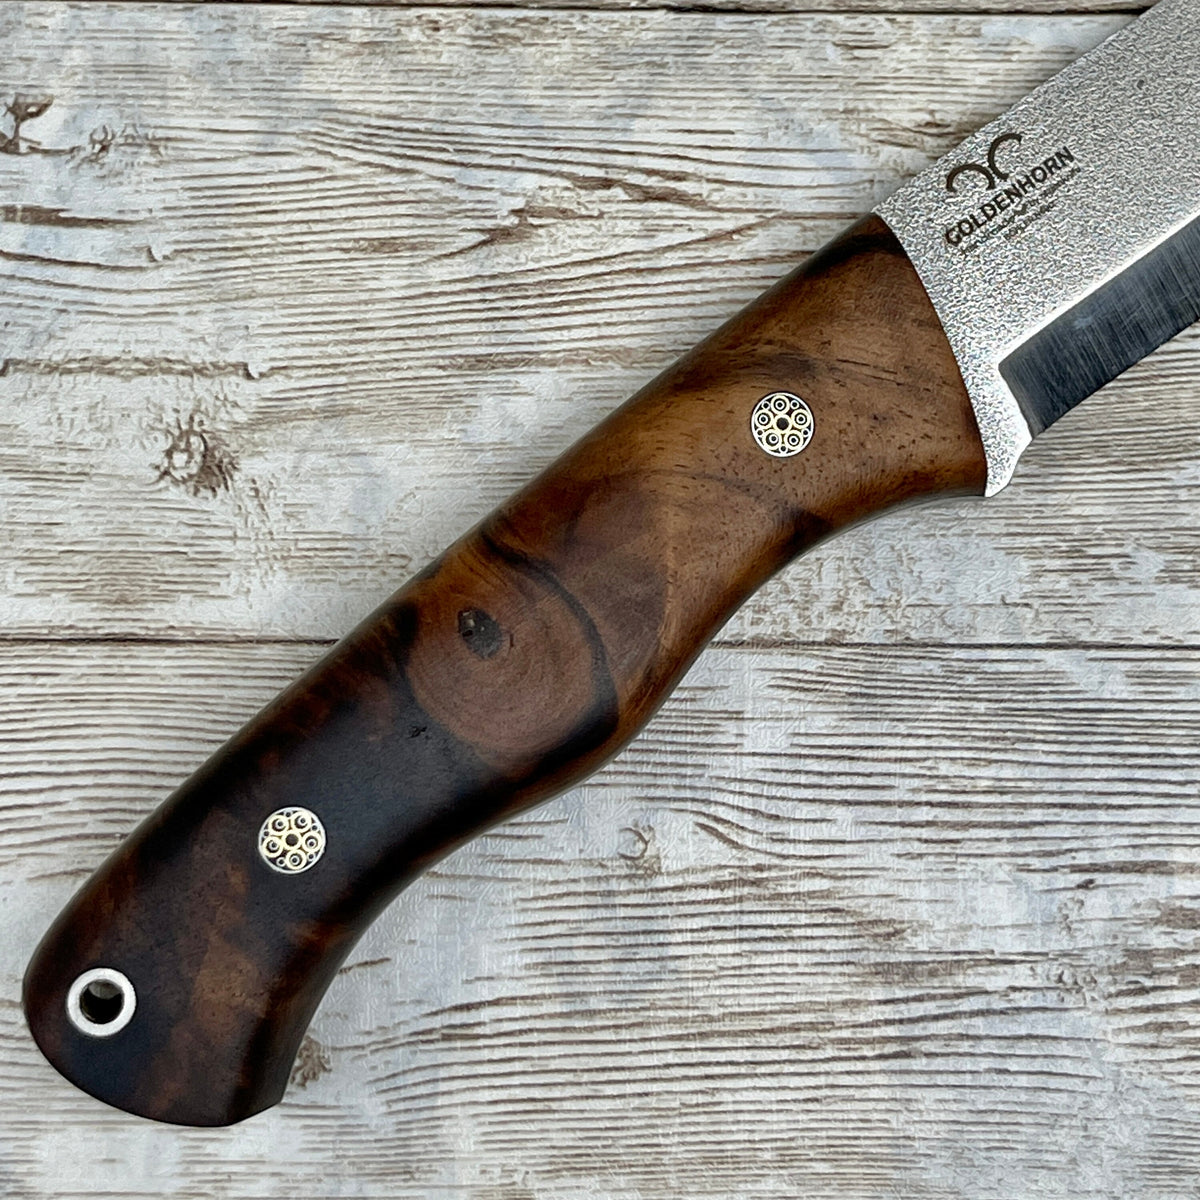 Full Tang Scandi Bohler N690 Steel Bushcraft Knife With Walnut Wood Handle  and Leather Sheath Opt. Magnesium Fire Starter Camping Knife -  Canada